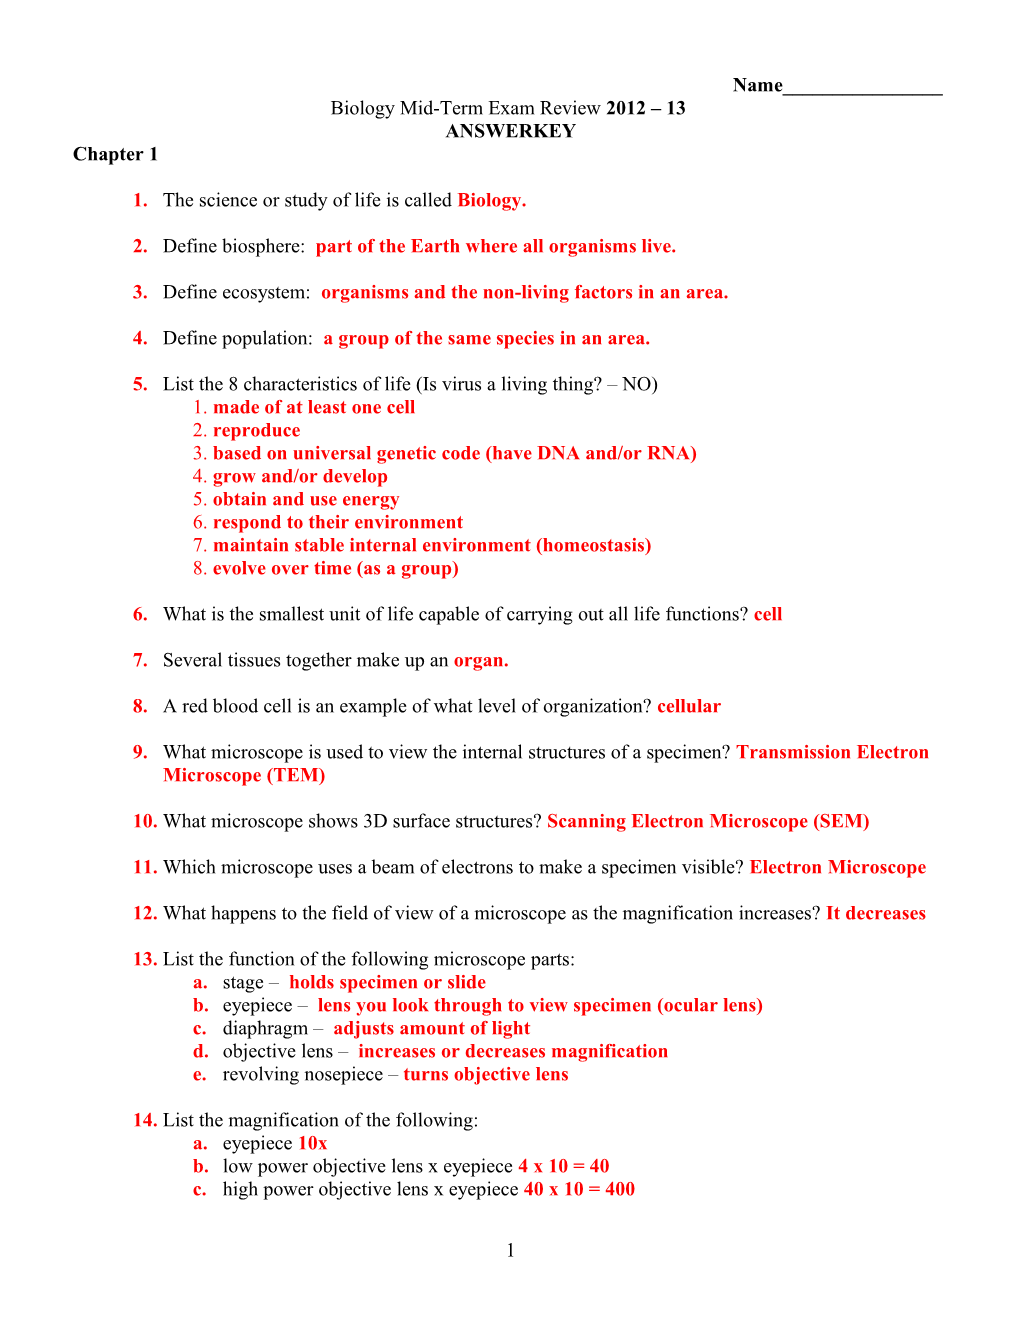 Biology Mid-Term Exam Review 2012 13